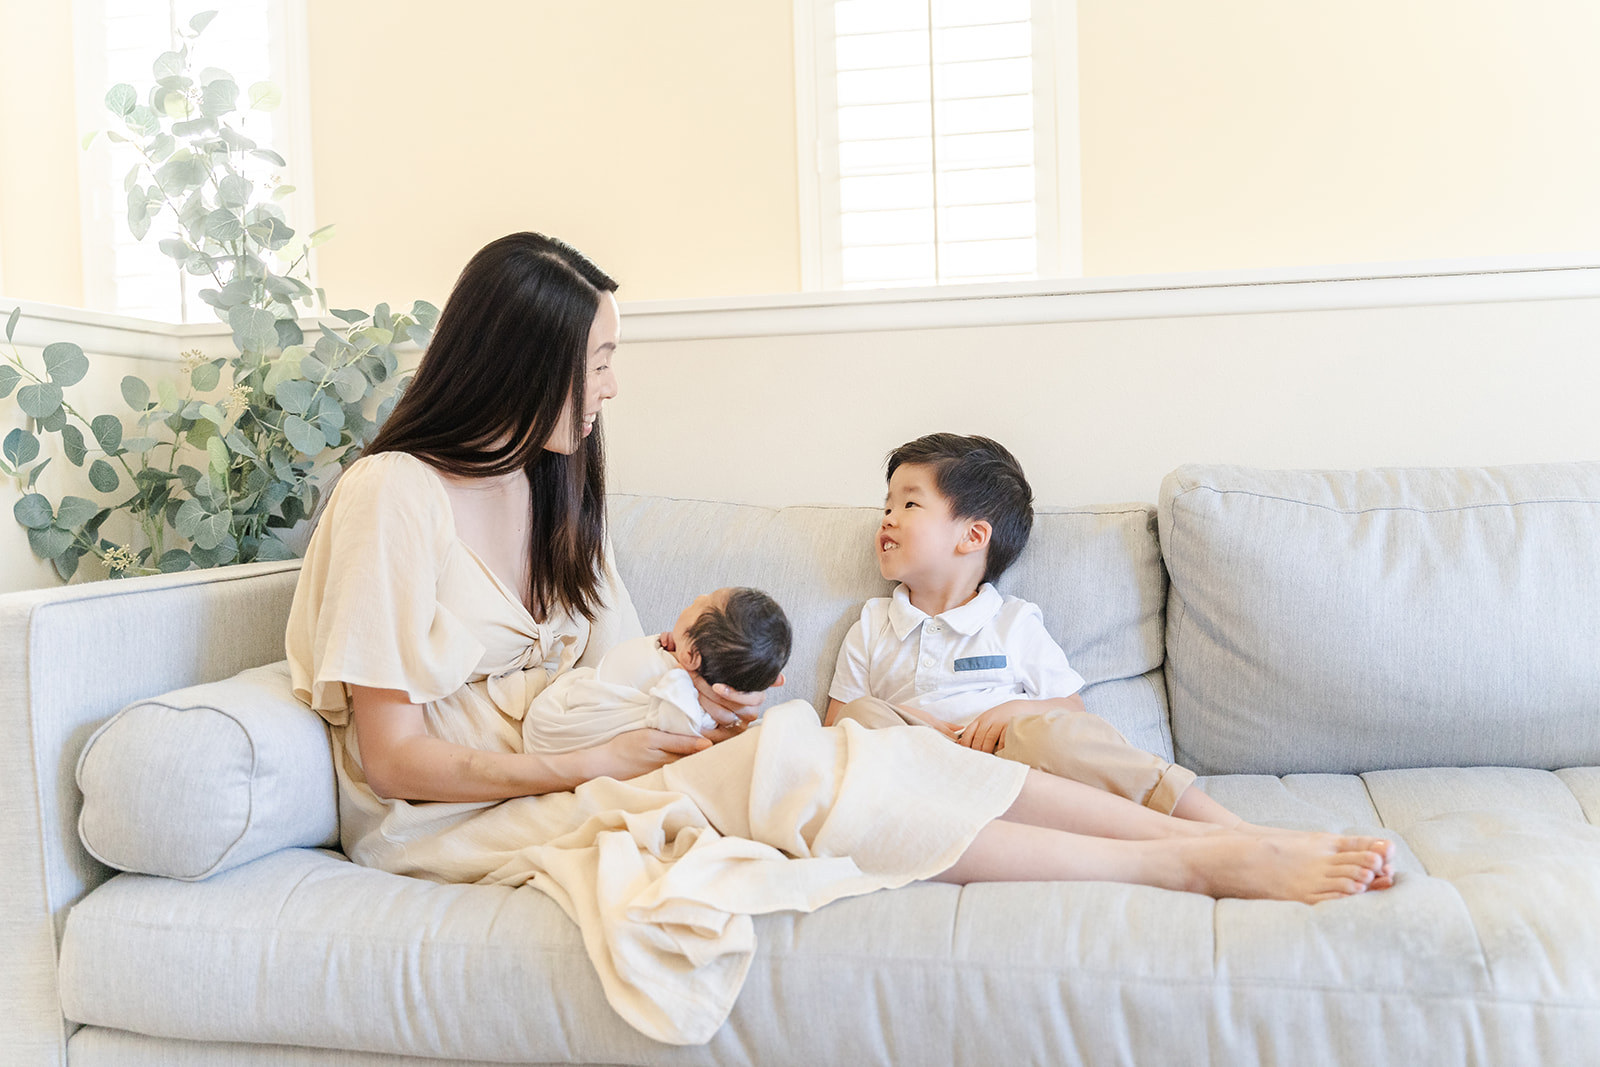 A mother in a tan dress sits across a couch with her newborn baby in her lap and toddler son next to her